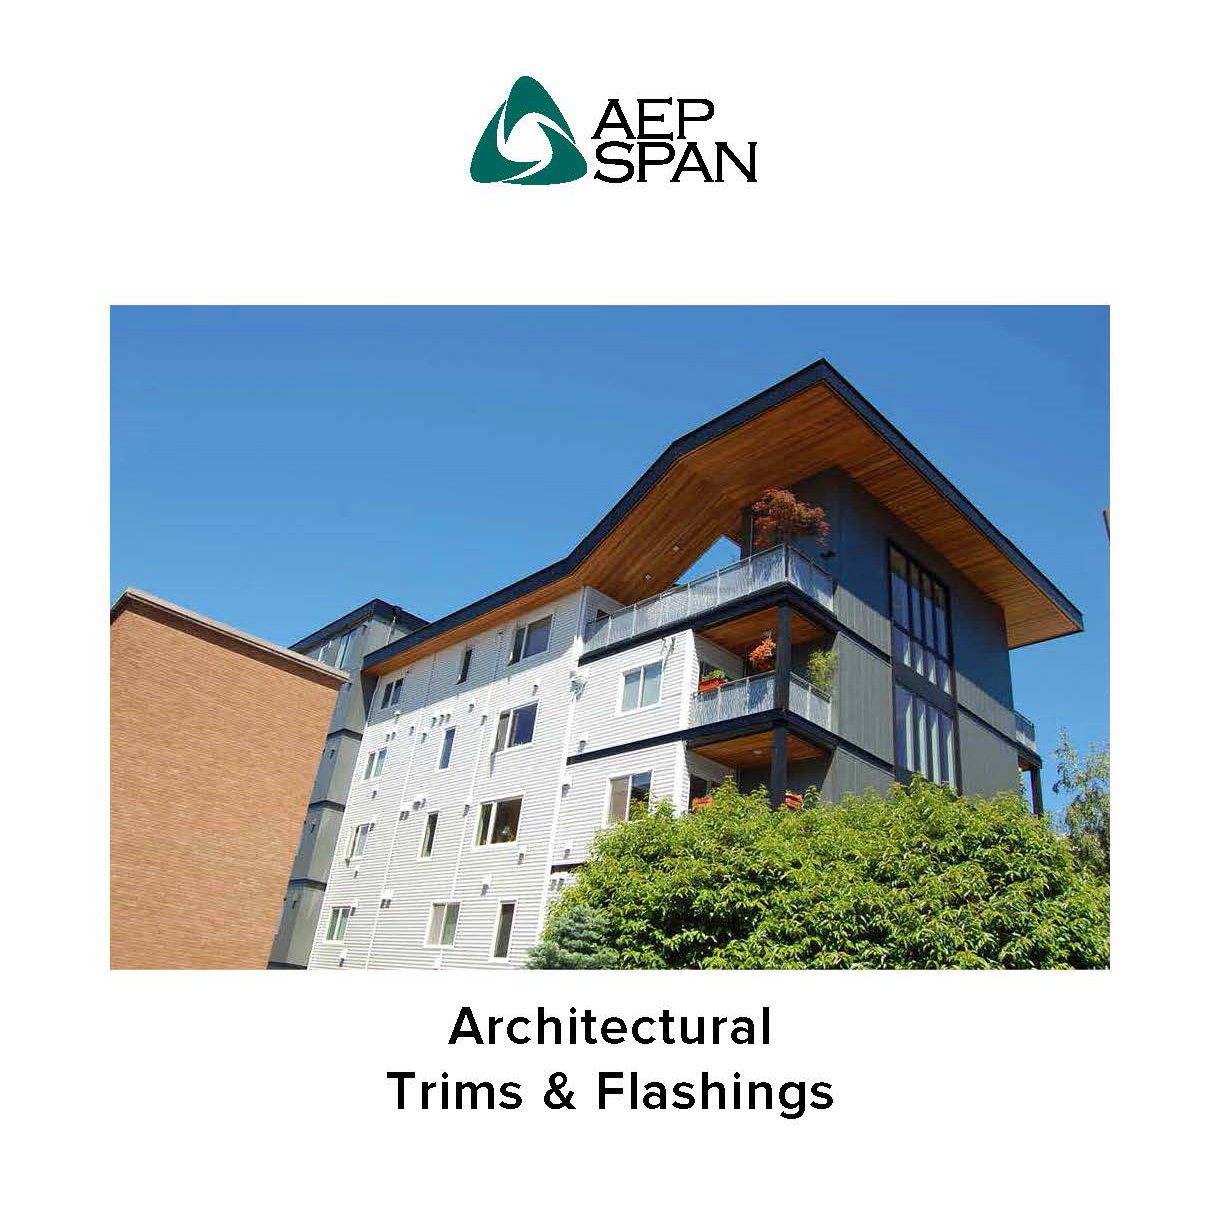 Architectural Trims & Flashings